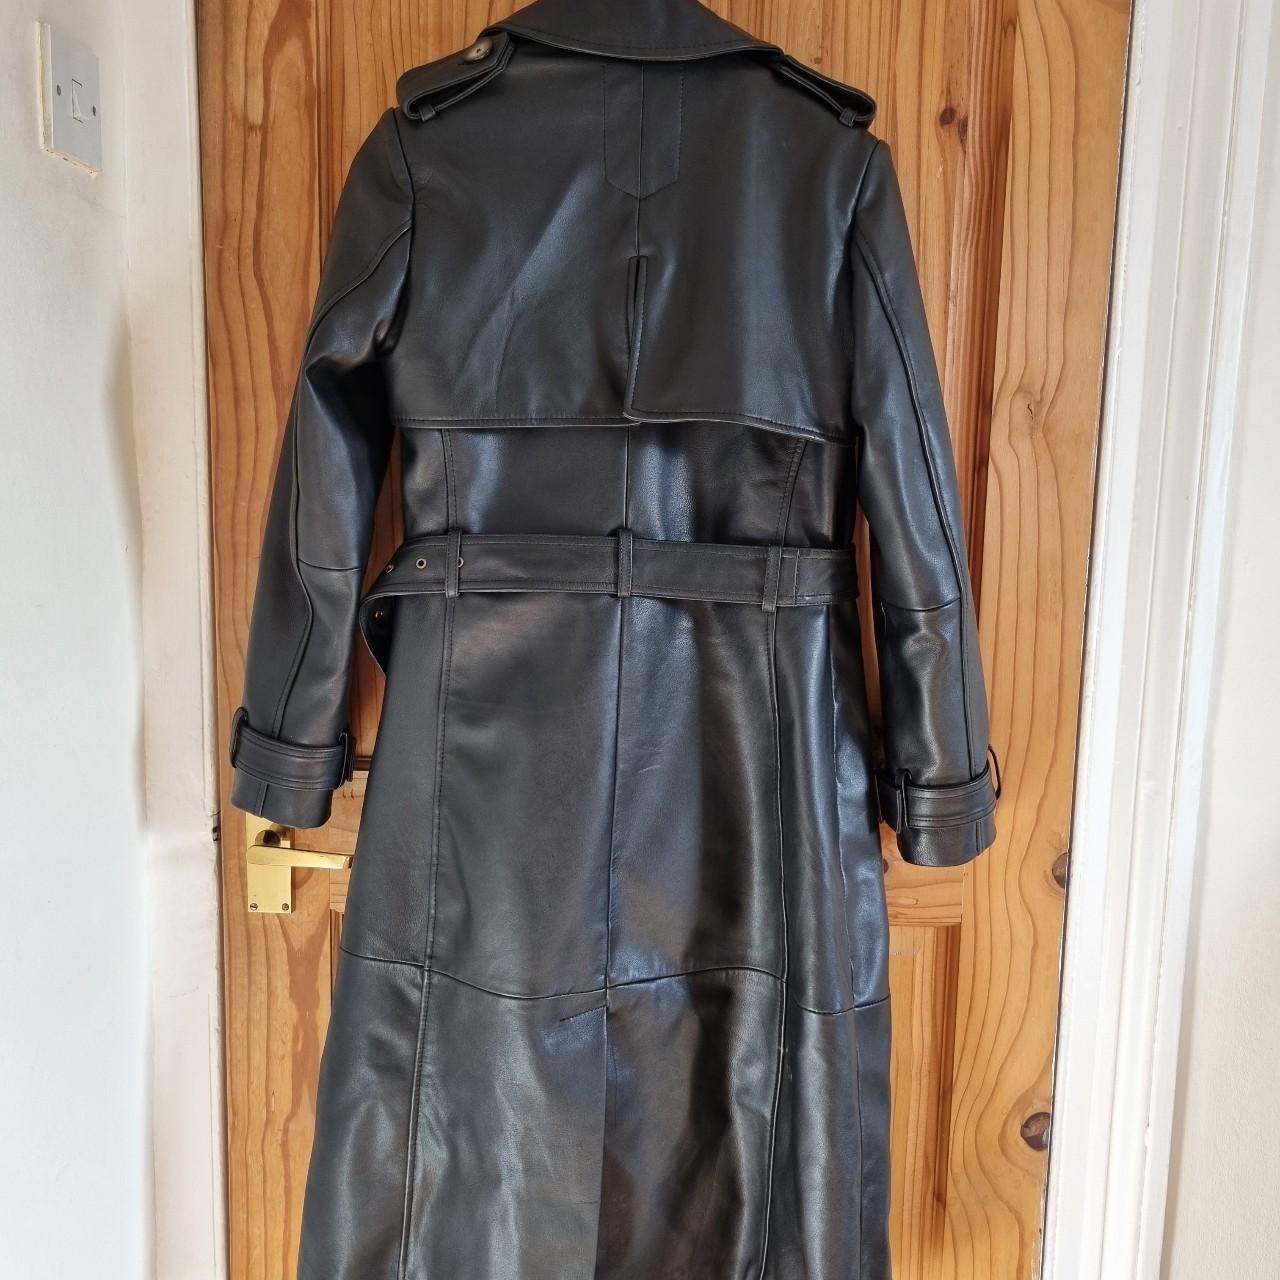 REAL LEATHER TRENCH COAT - SIZE XS WORN... - Depop